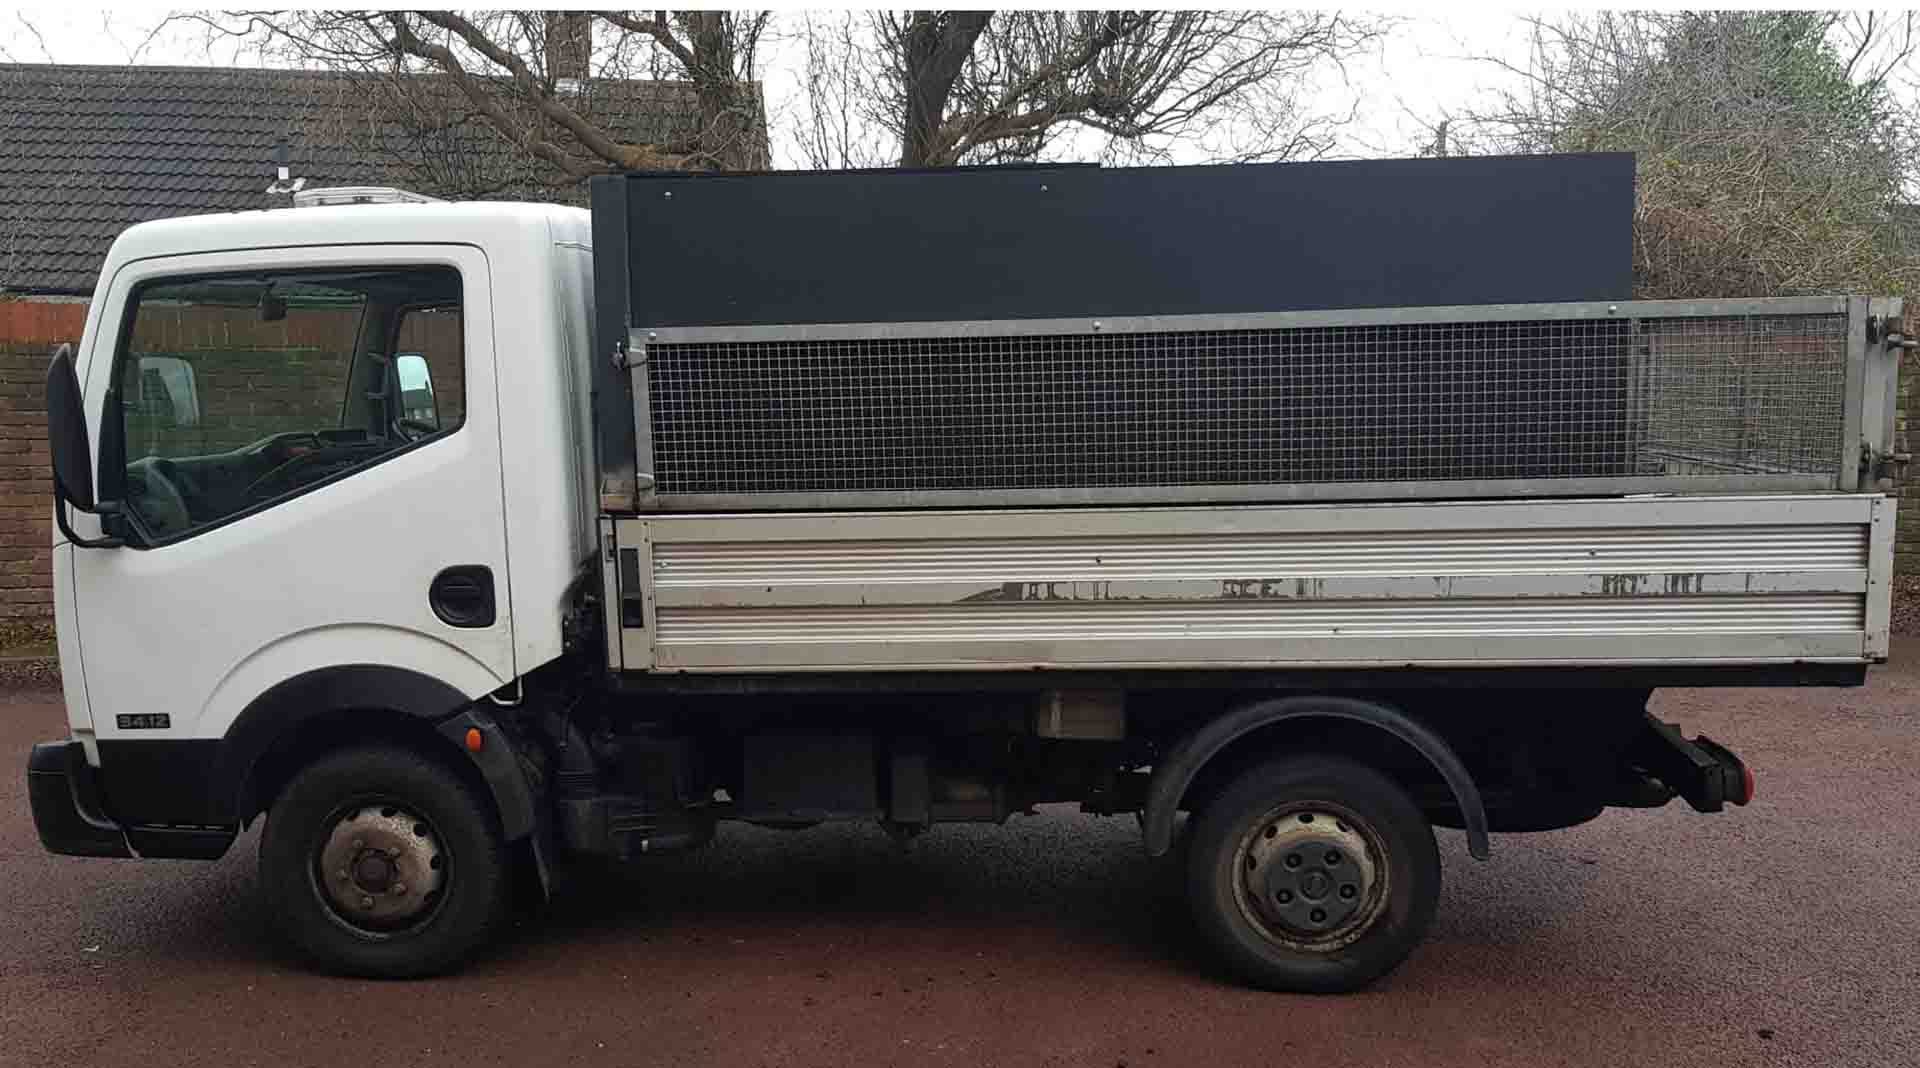 2012 Nissan Cabstar 34.12 dropside, side view